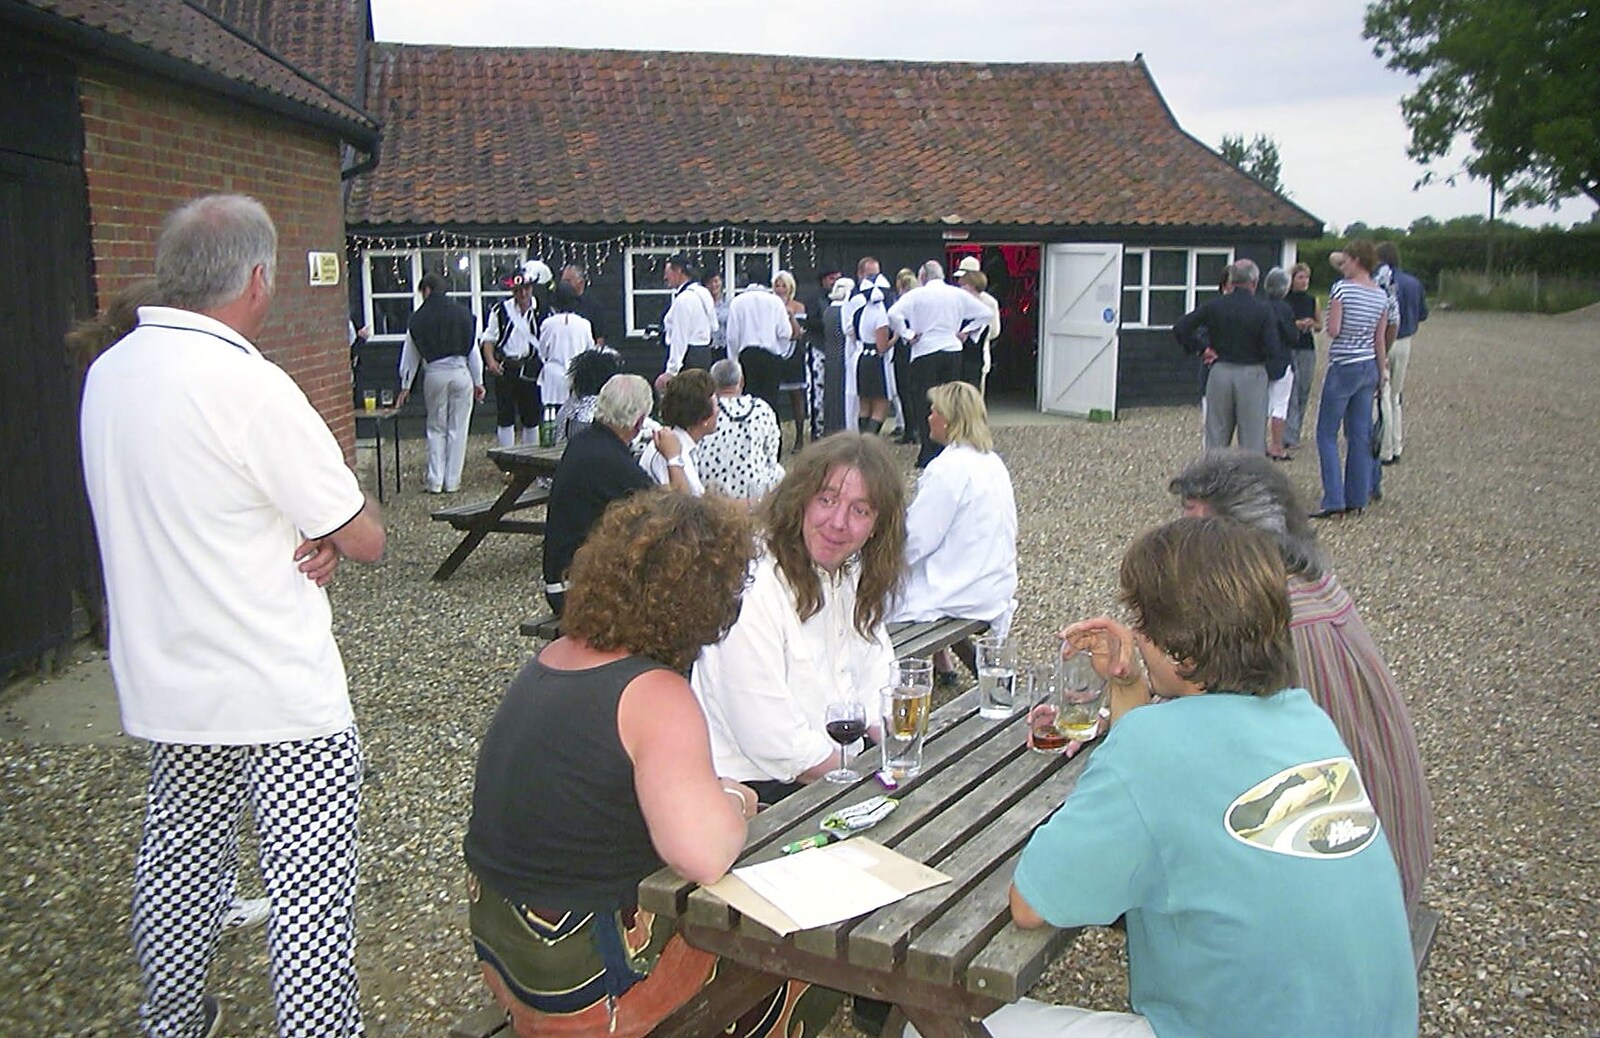 Hanging out before the gig from The BBs at Great Ellingham, Norfolk - 18th July 2003